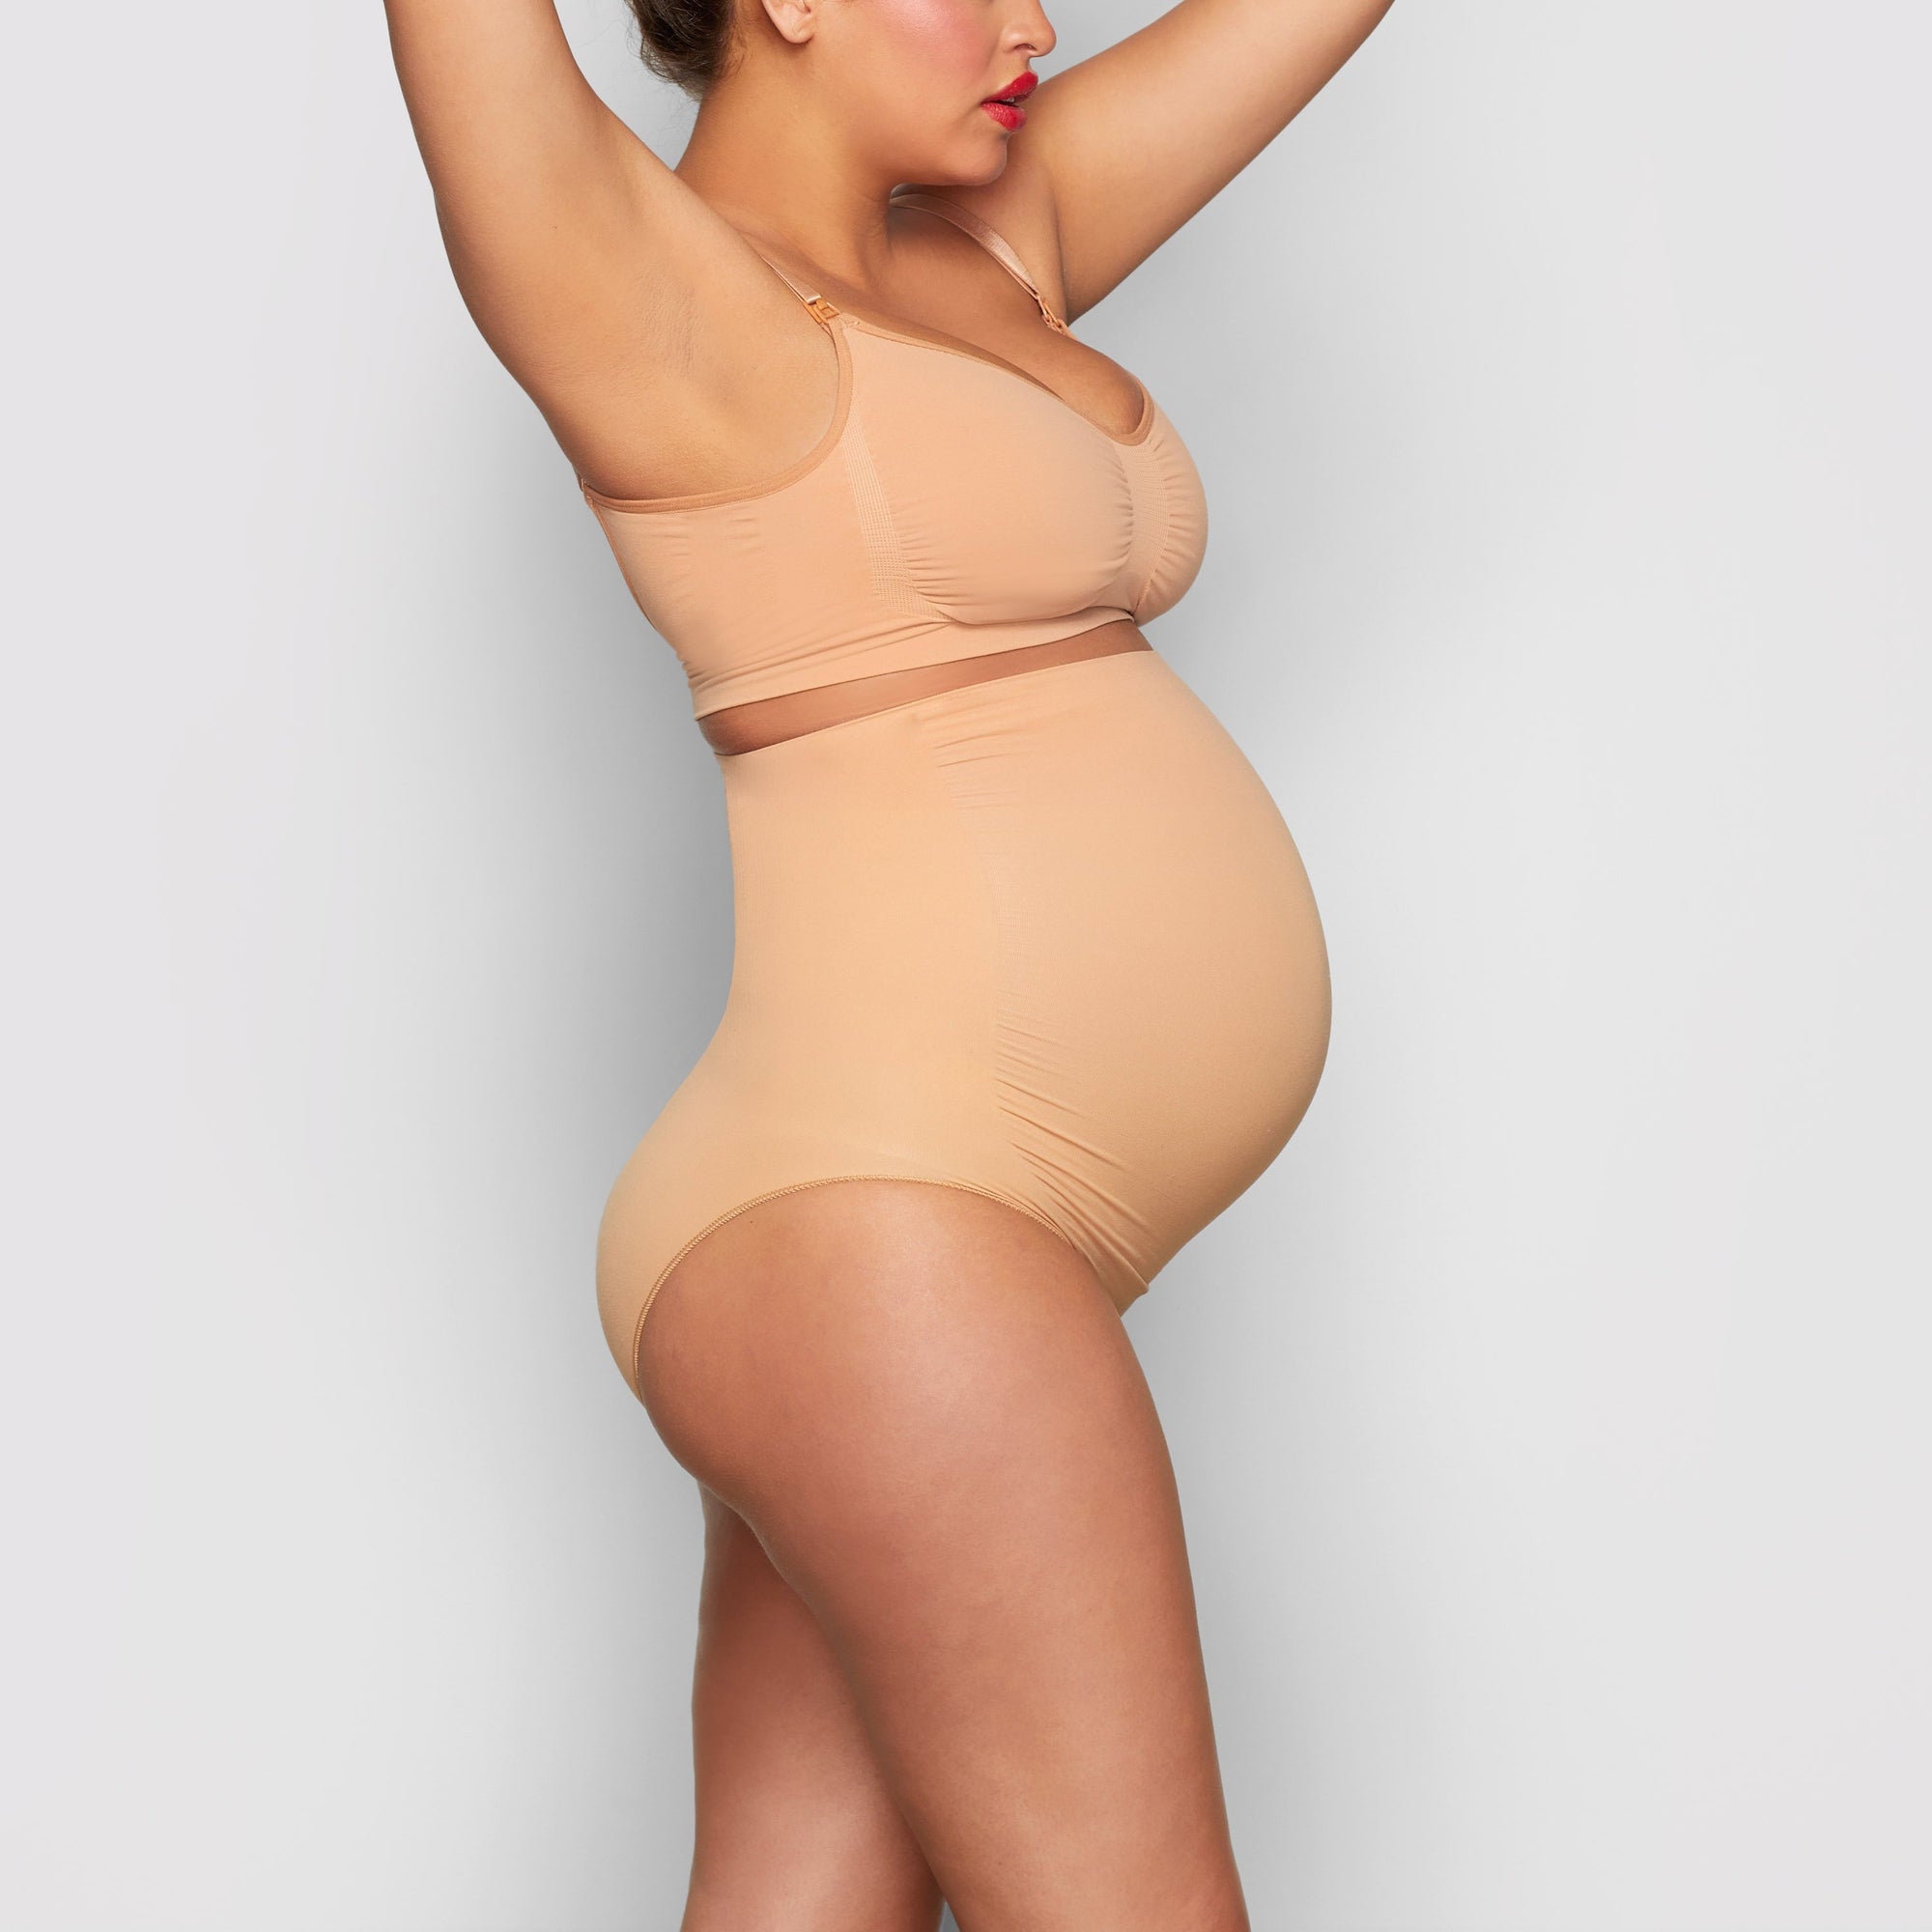 Skims maternity review: Inclusive pregnancy undergarments - Reviewed